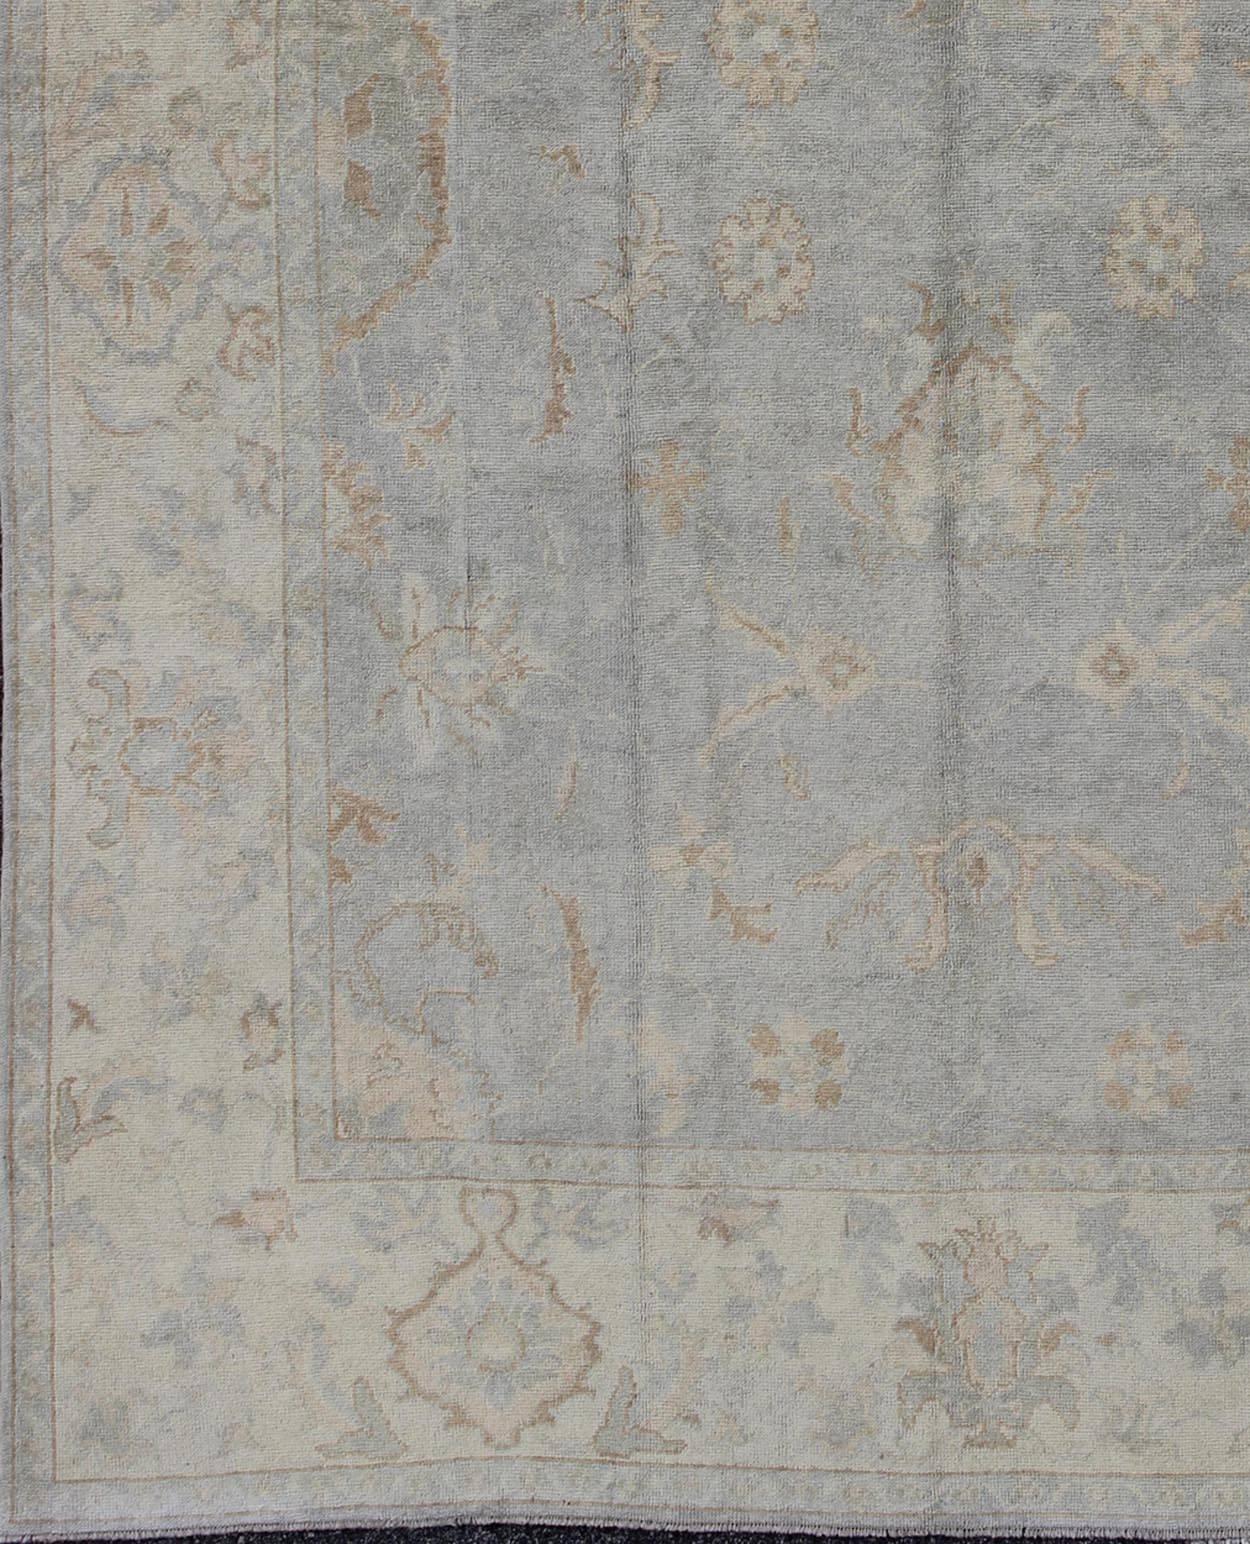 Faded Turkish Oushak rug with all-over vining floral design in grey and cream, rug en-112736, country of origin / type: Turkey / Oushak.

The design of this beautiful vintage Oushak rug, Turkey is enhanced by its lustrous wool. The light